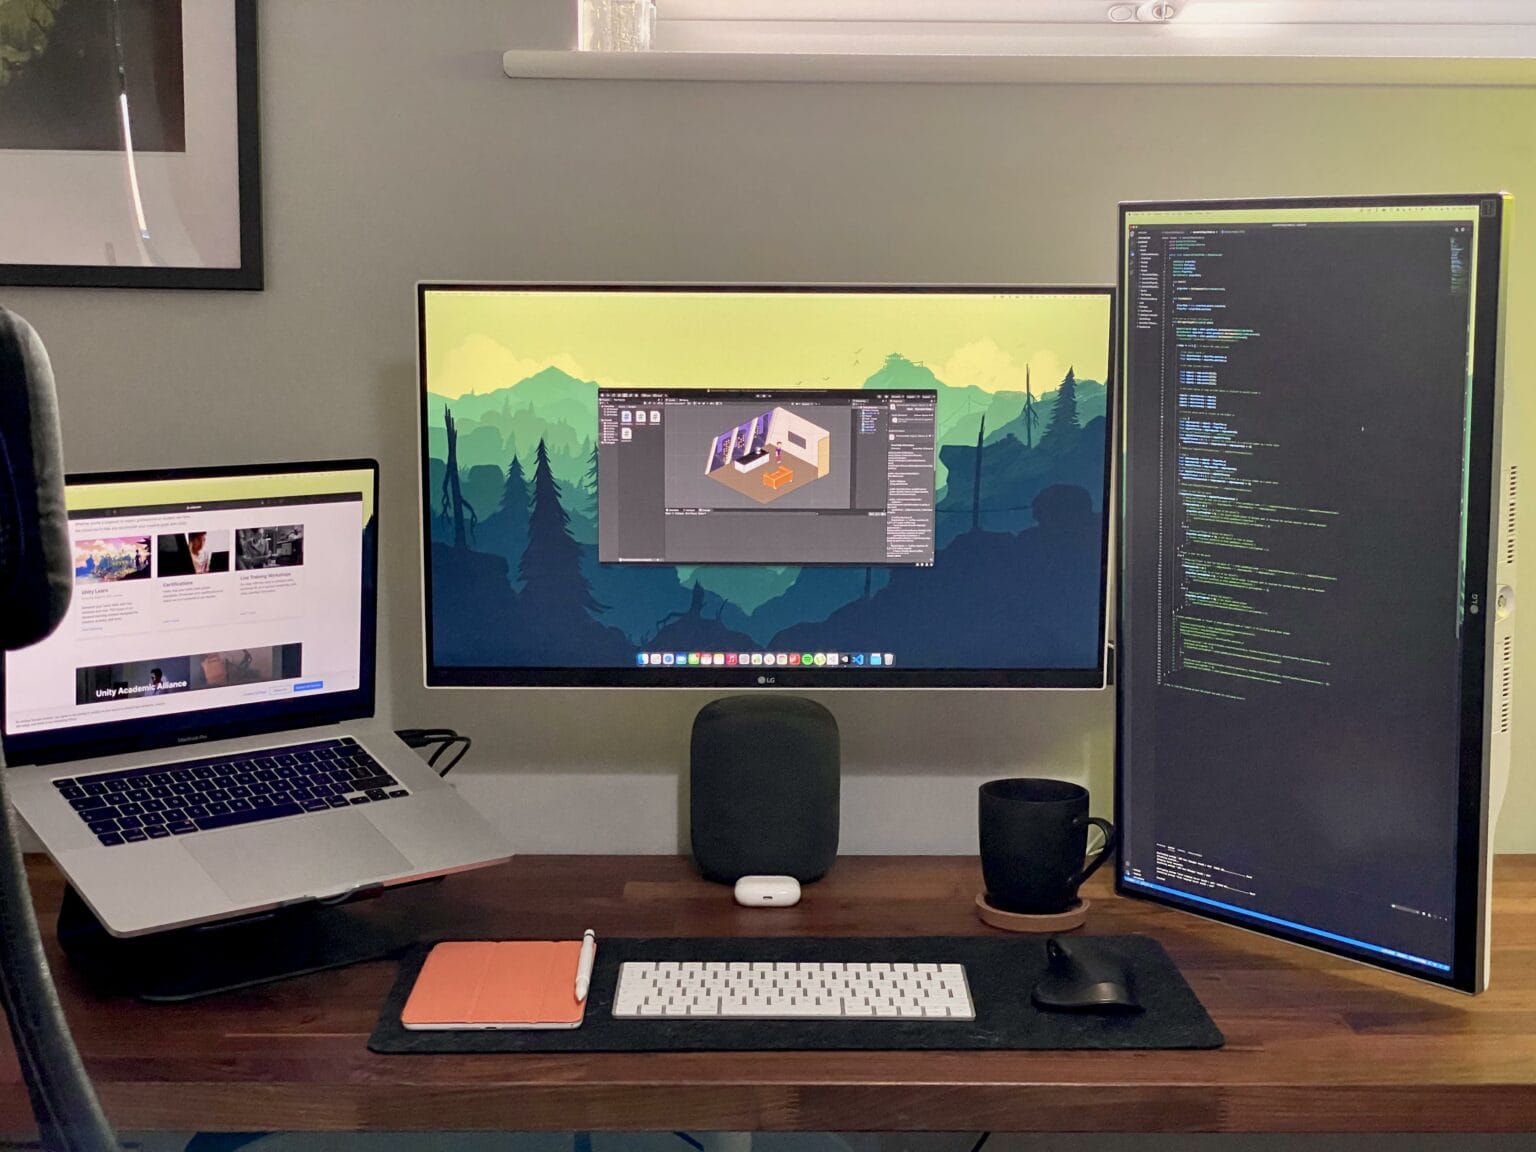 Why Vertical Monitor is Good for Programmers?